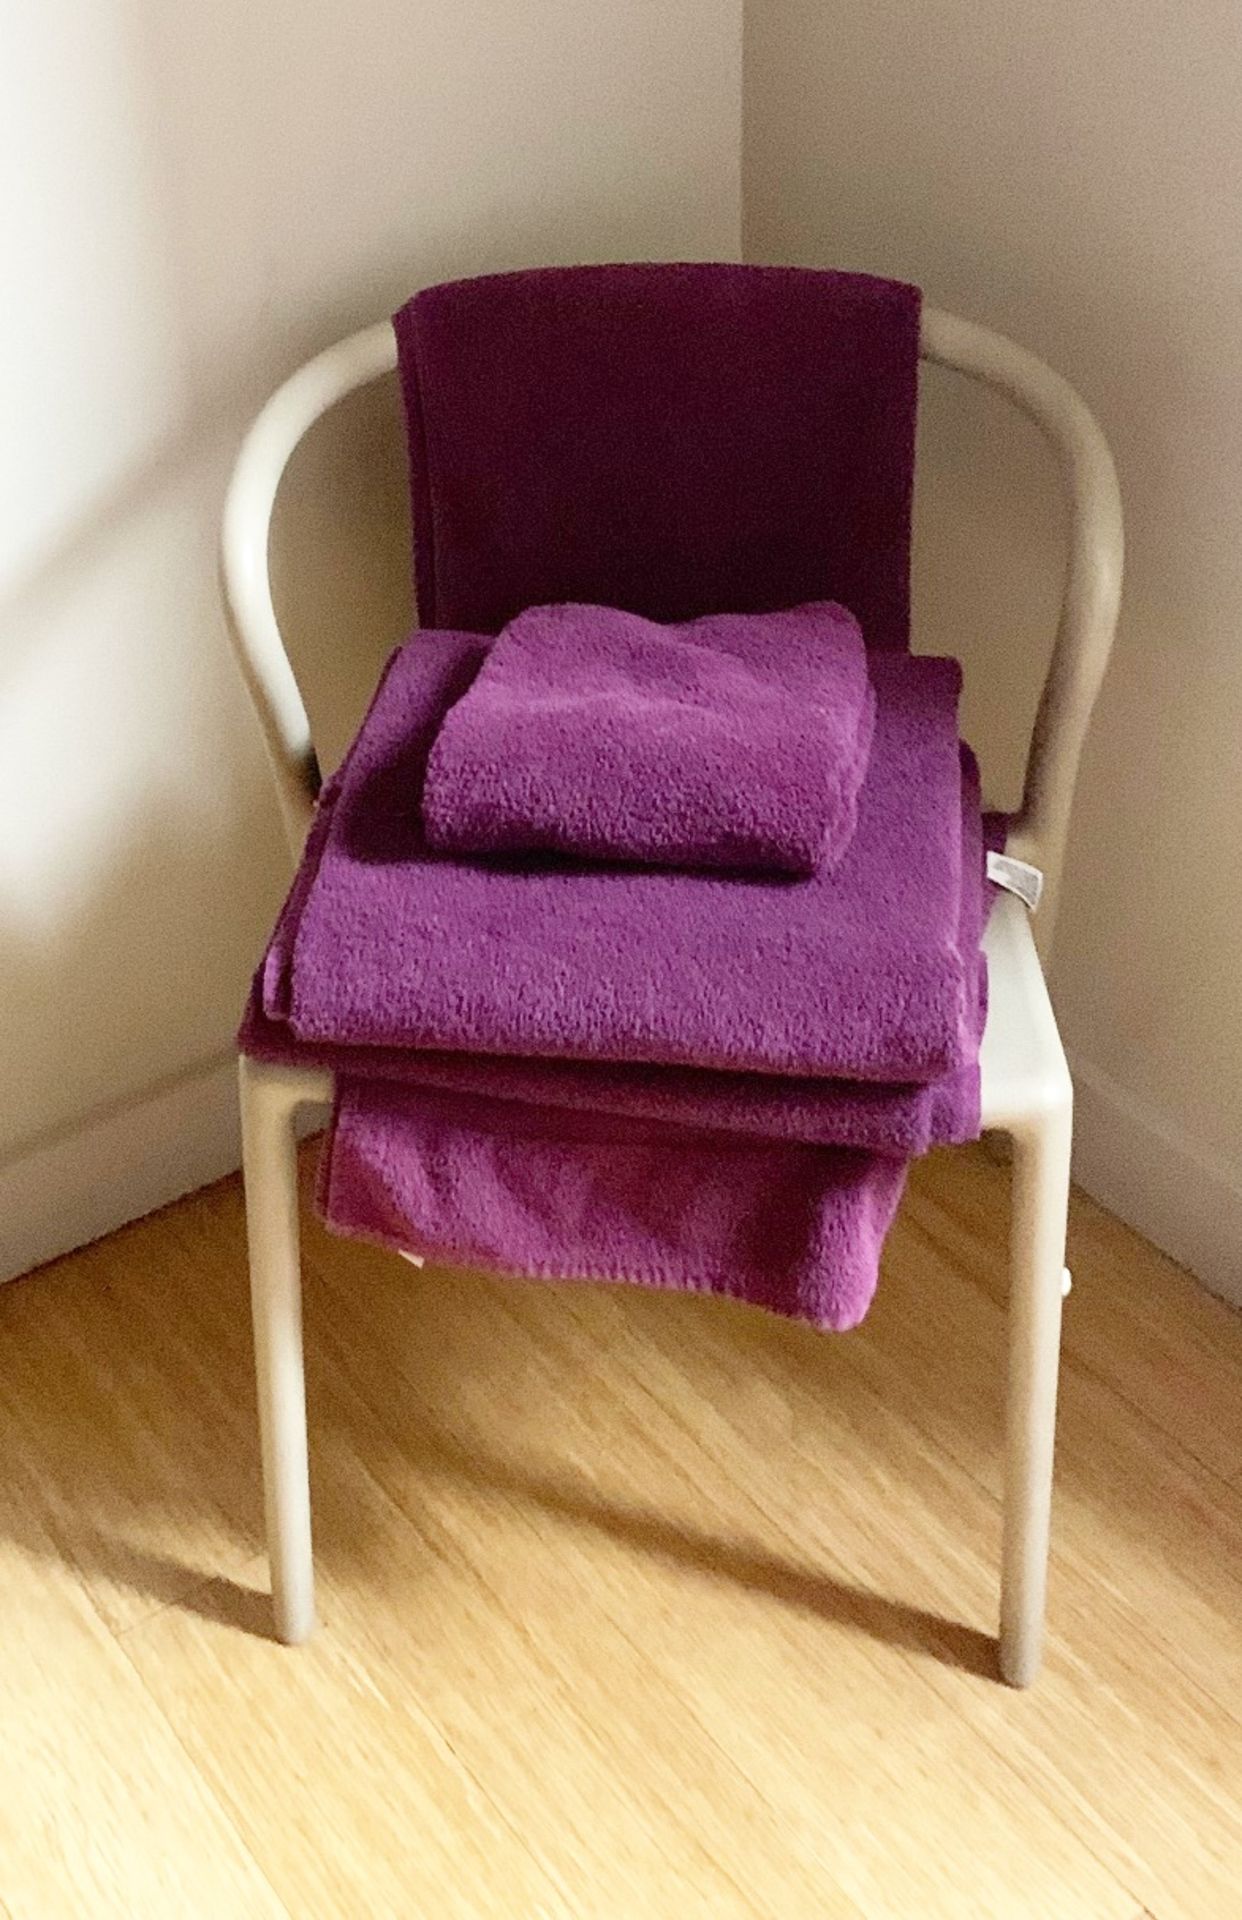 30 x Majestic Luxury 620gsm Bath Towels in Purple - Size MEDIUM - RRP £290 - CL587 - Location: - Image 4 of 4